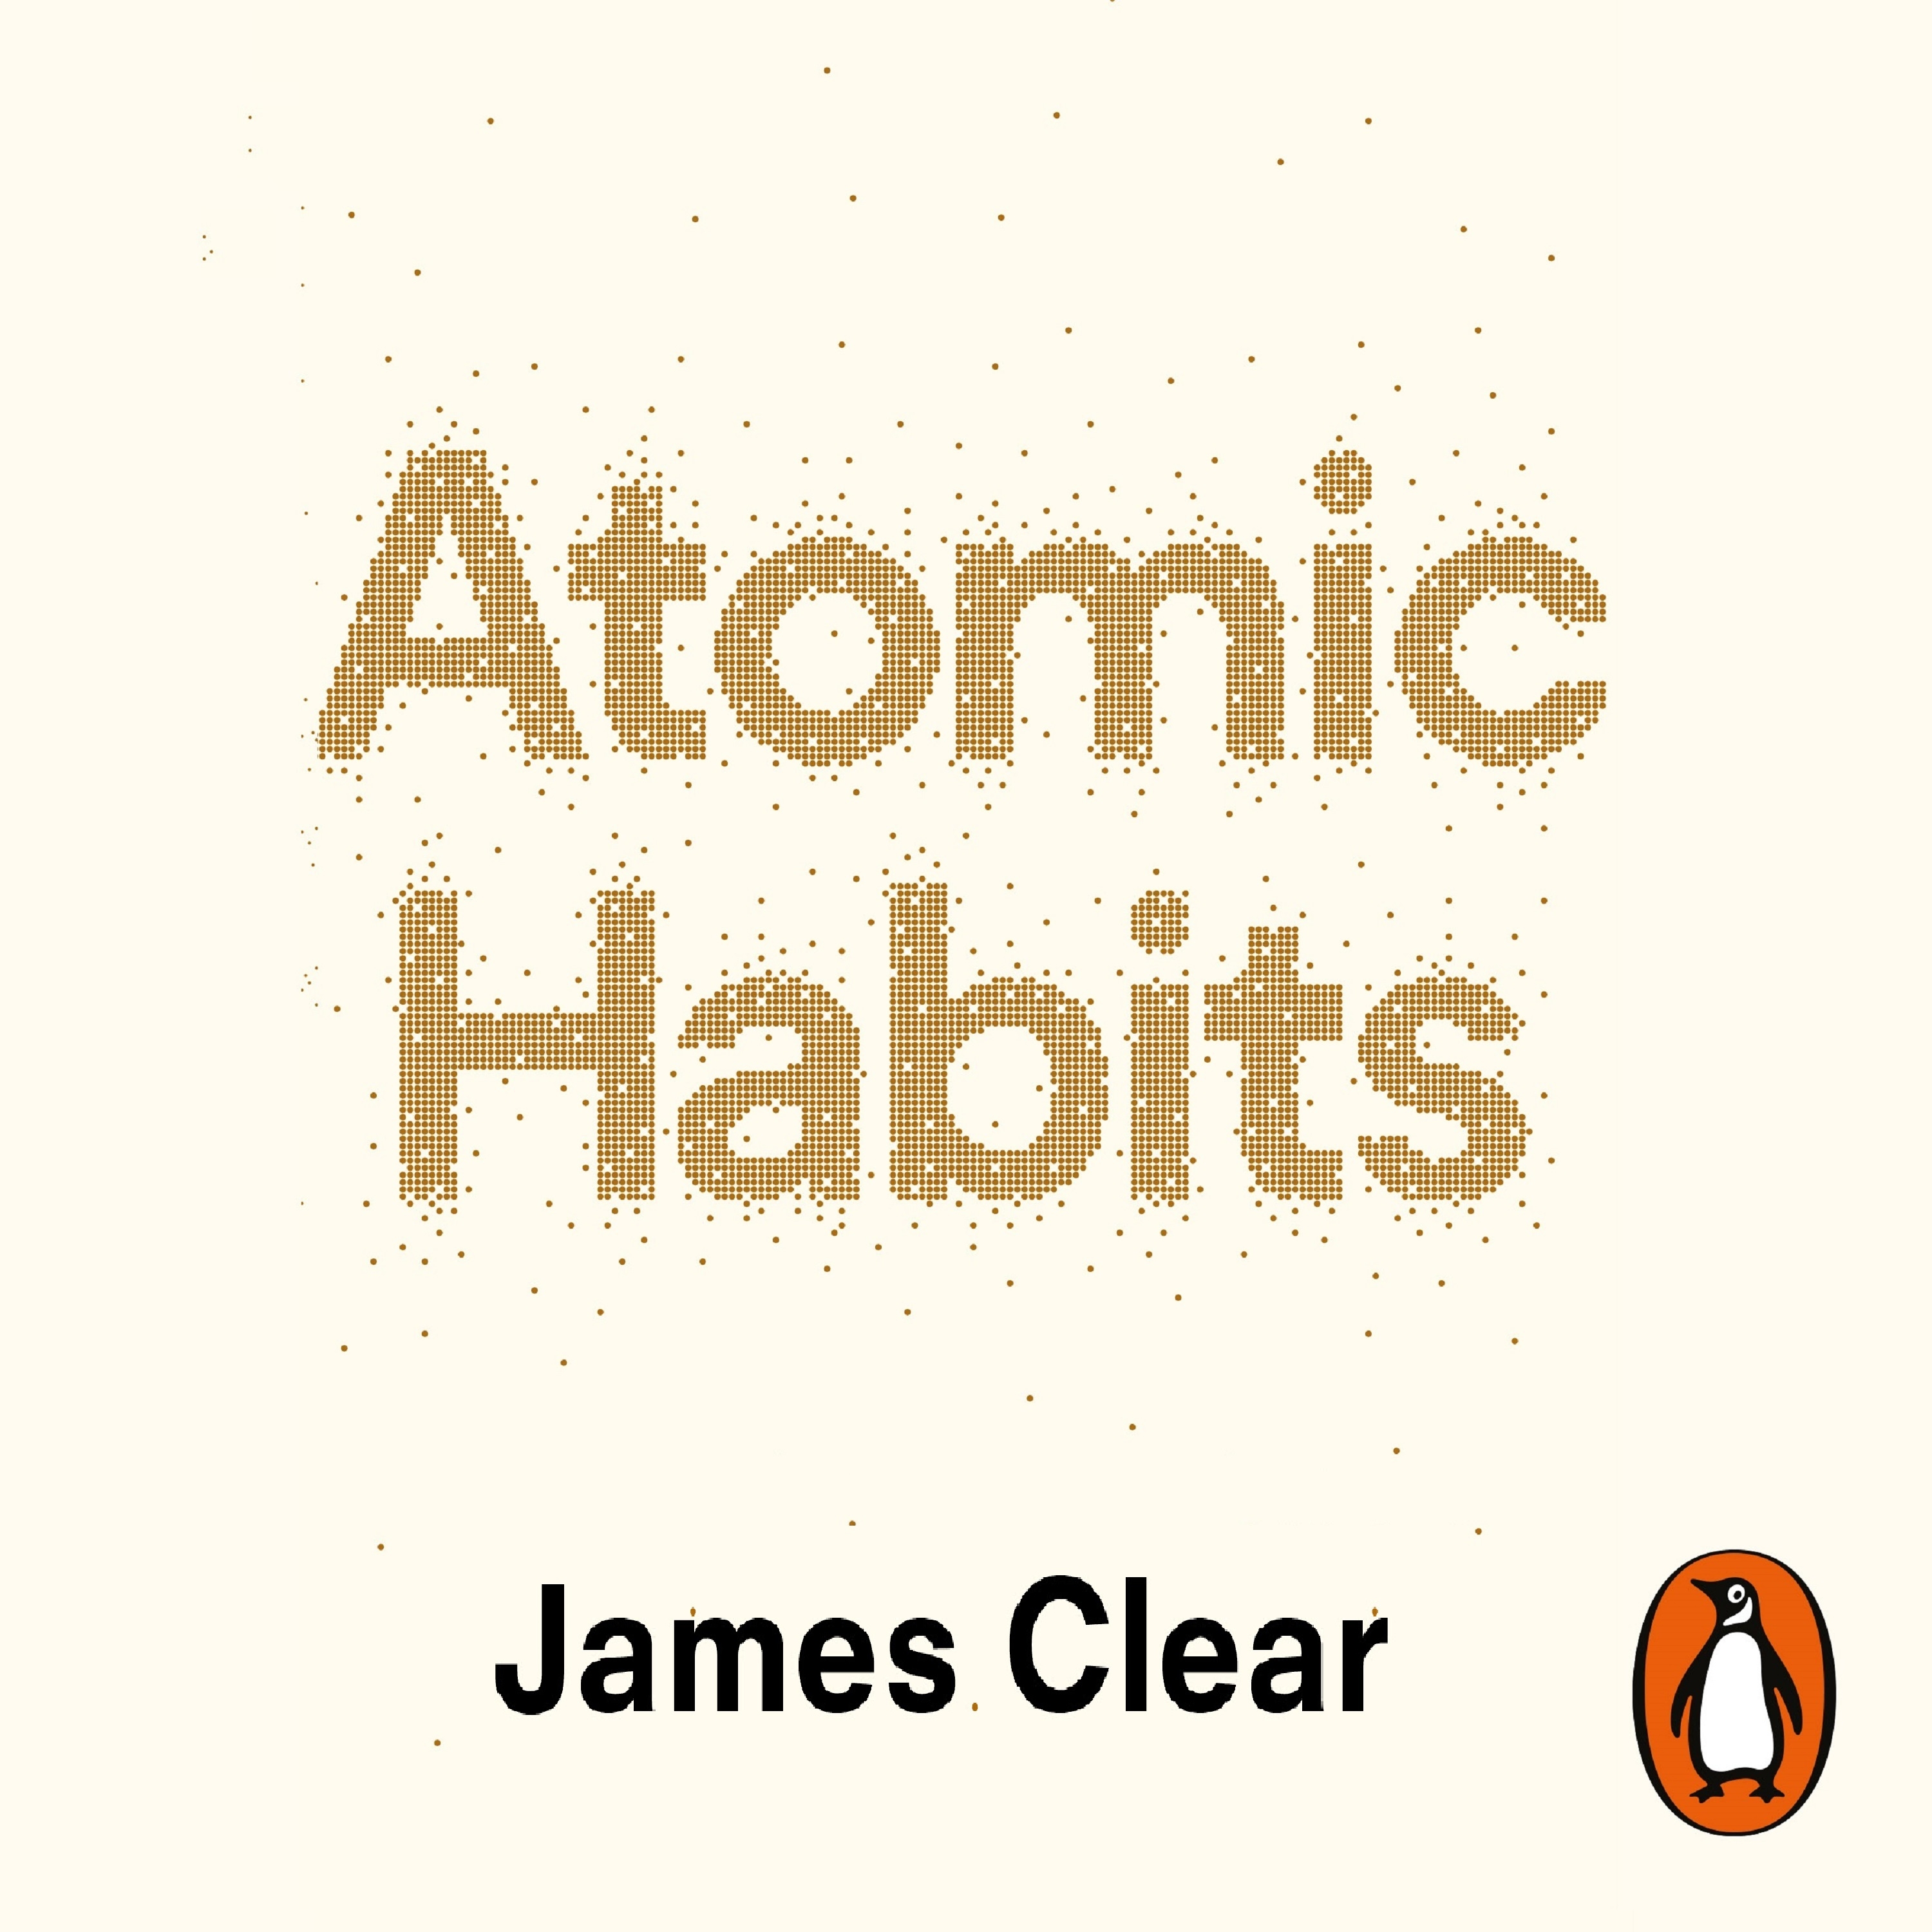 Audiobook image for Atomic Habits: cream background with the title in large bronze font in the centre, a scatter pattern around the letters to represent atoms, and the author name at the bottom.